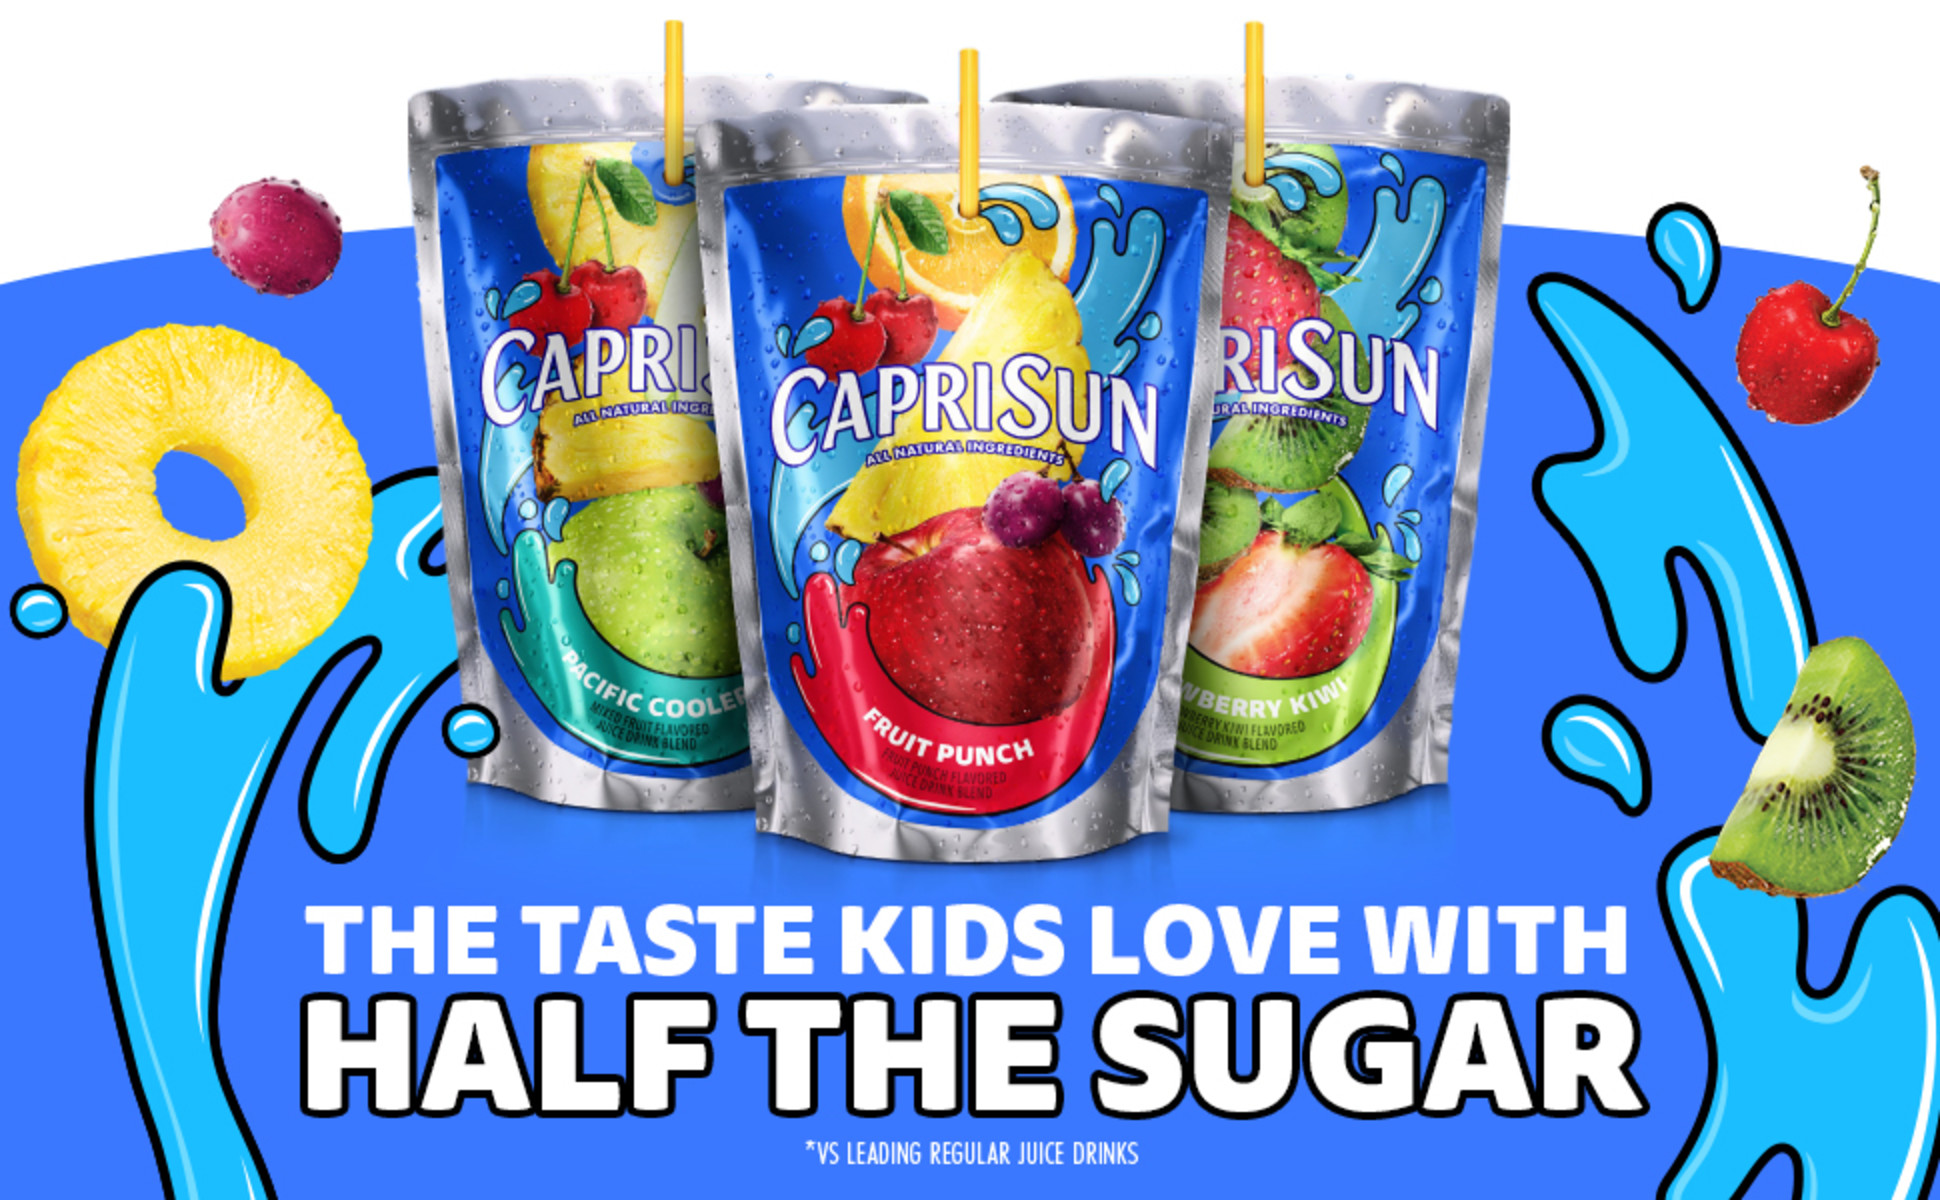 Capri Sun packs its pouches with filtered water instead of juice